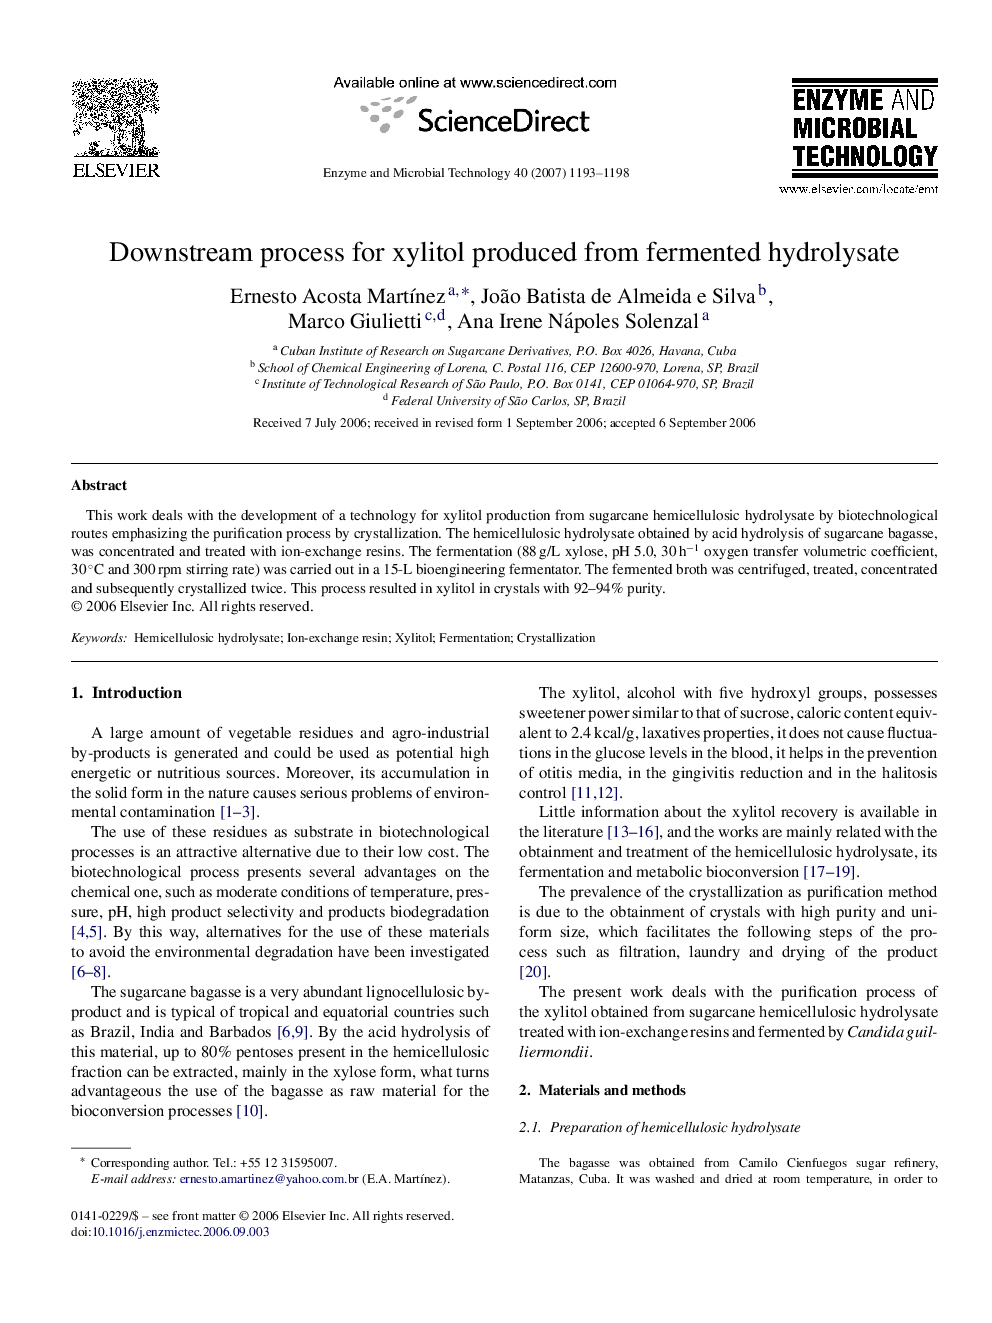 Downstream process for xylitol produced from fermented hydrolysate